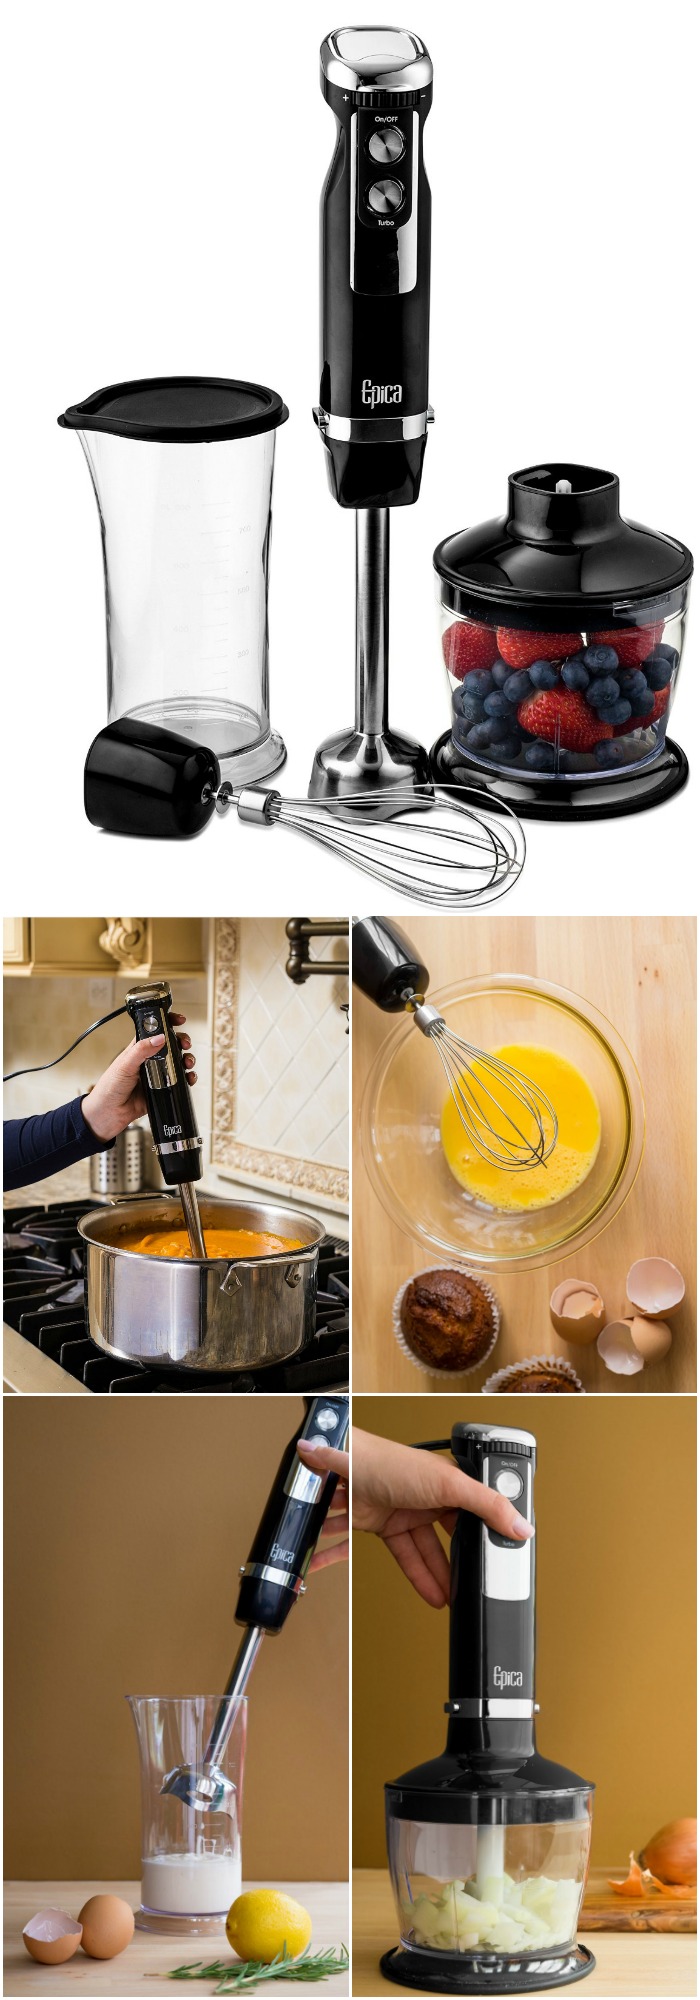 Home Gadgets - If you don't have a hand blender it's time to get one. Best thing ever!